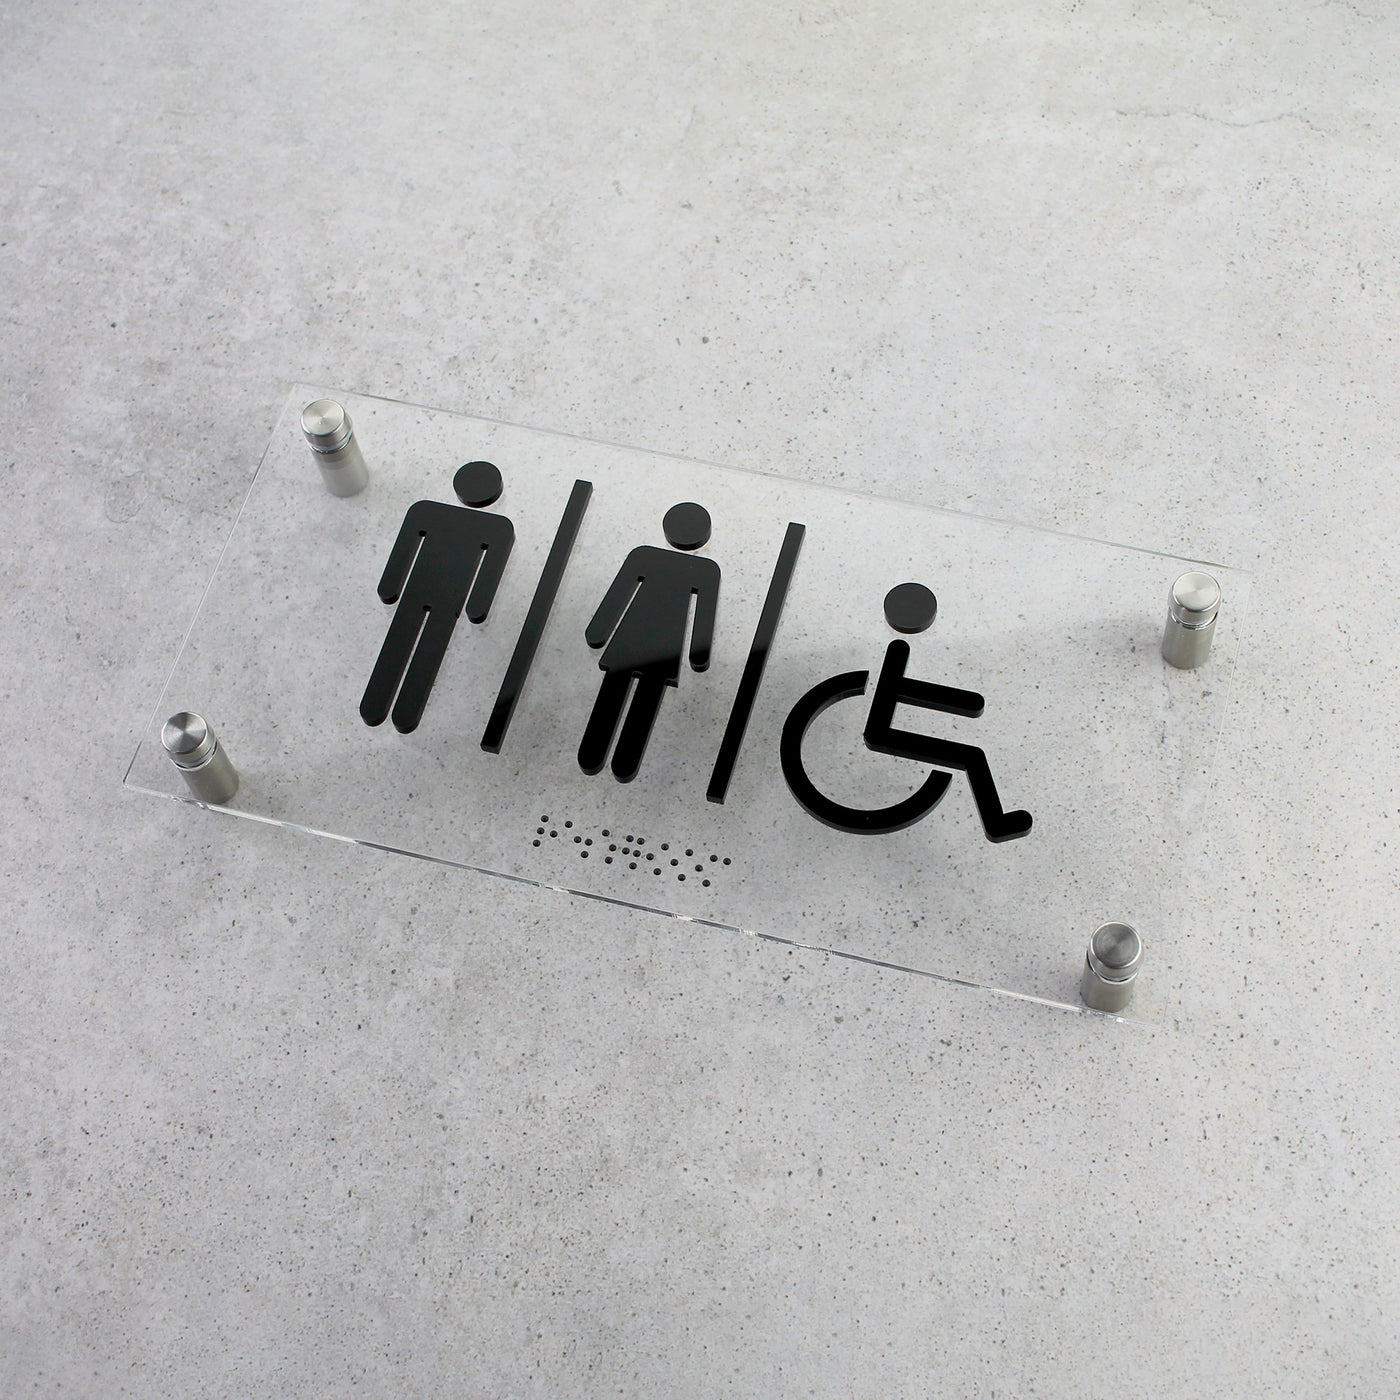 Acrylic All Gender Restroom Sign with Steel Holders "Classic" Design